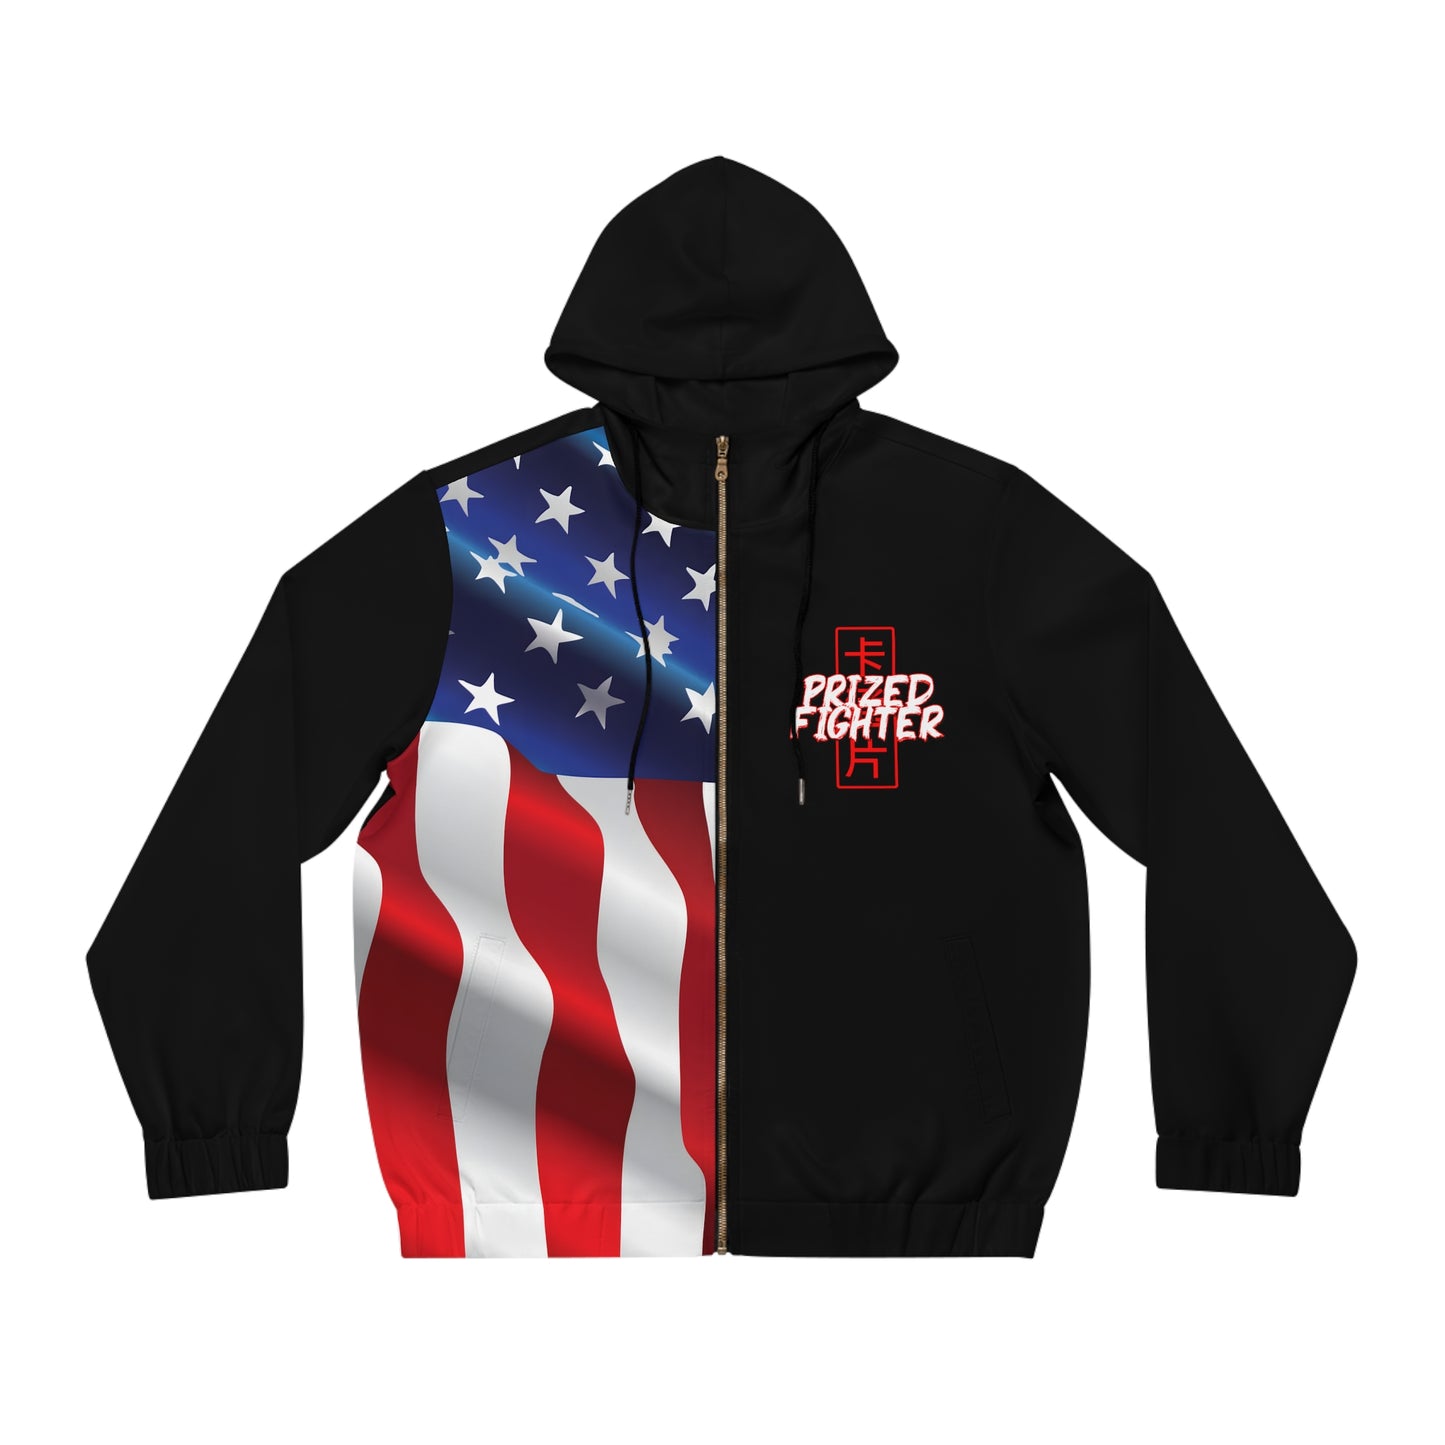 Kǎtōng Piàn - Prized Fighter Collection - America - 009 - Men's Full-Zip Hoodie